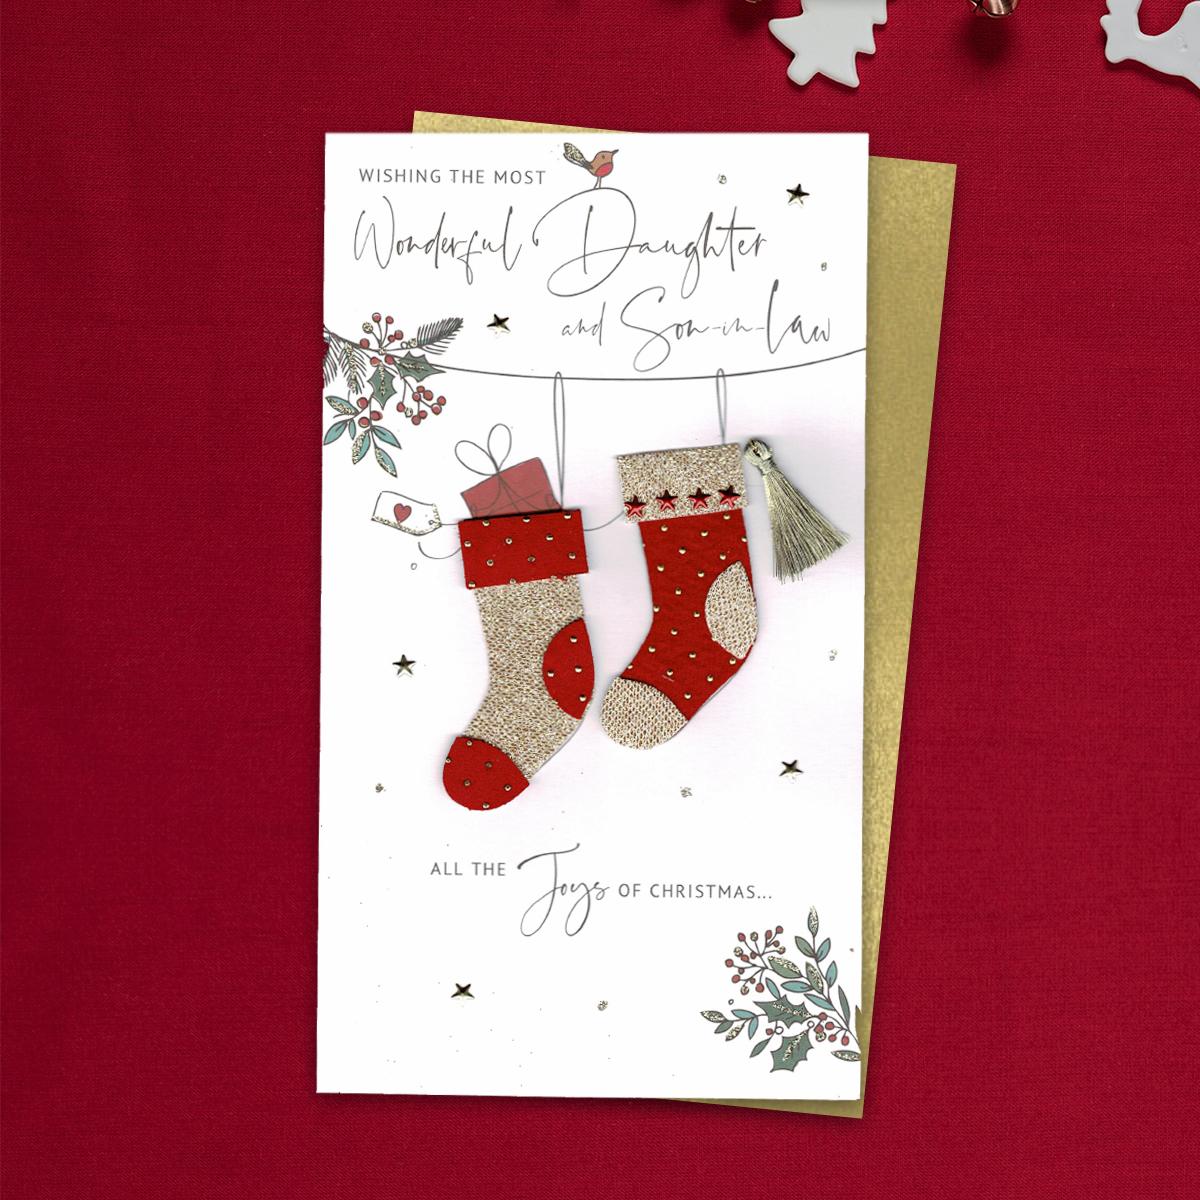 Wishing The Most Wonderful Daughter And Son In Law All The Joys Of Christmas... Featuring Two Christmas Stockings With decoupage And Embellishments. Completed With A Gold Coloured Envelope